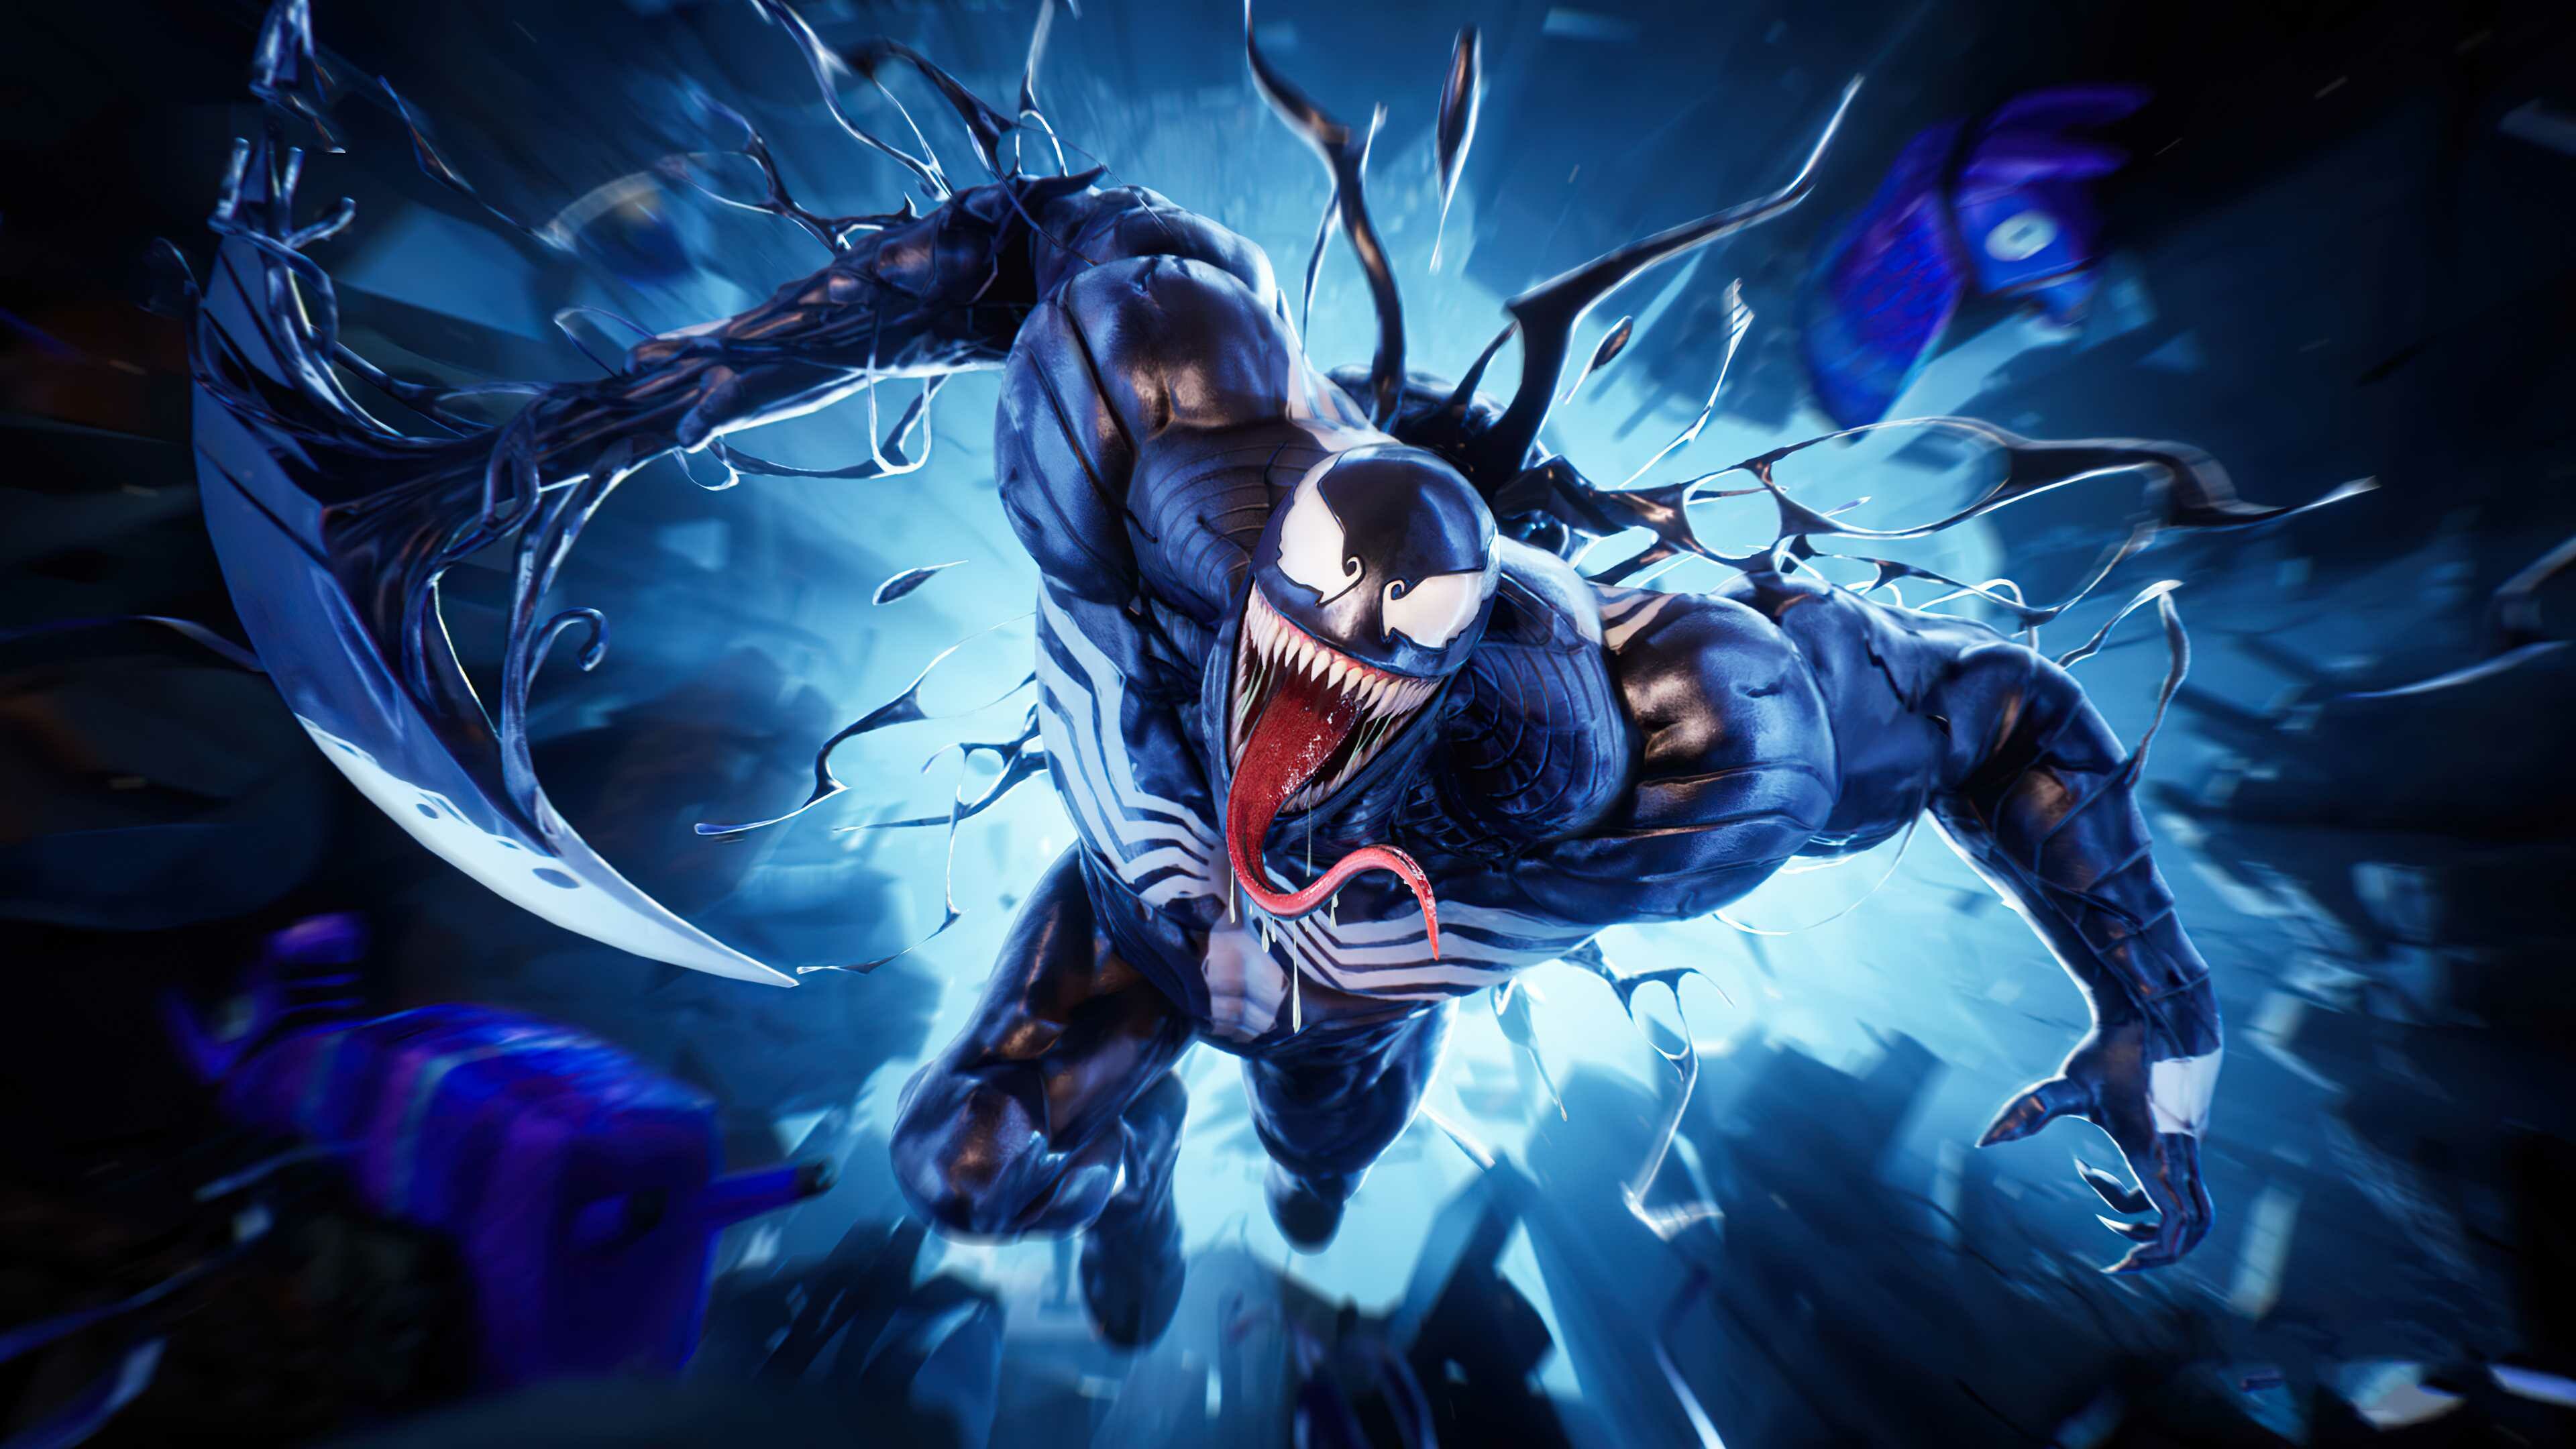 Venom: A character appearing in American comic books published by Marvel Comics. 3840x2160 4K Wallpaper.